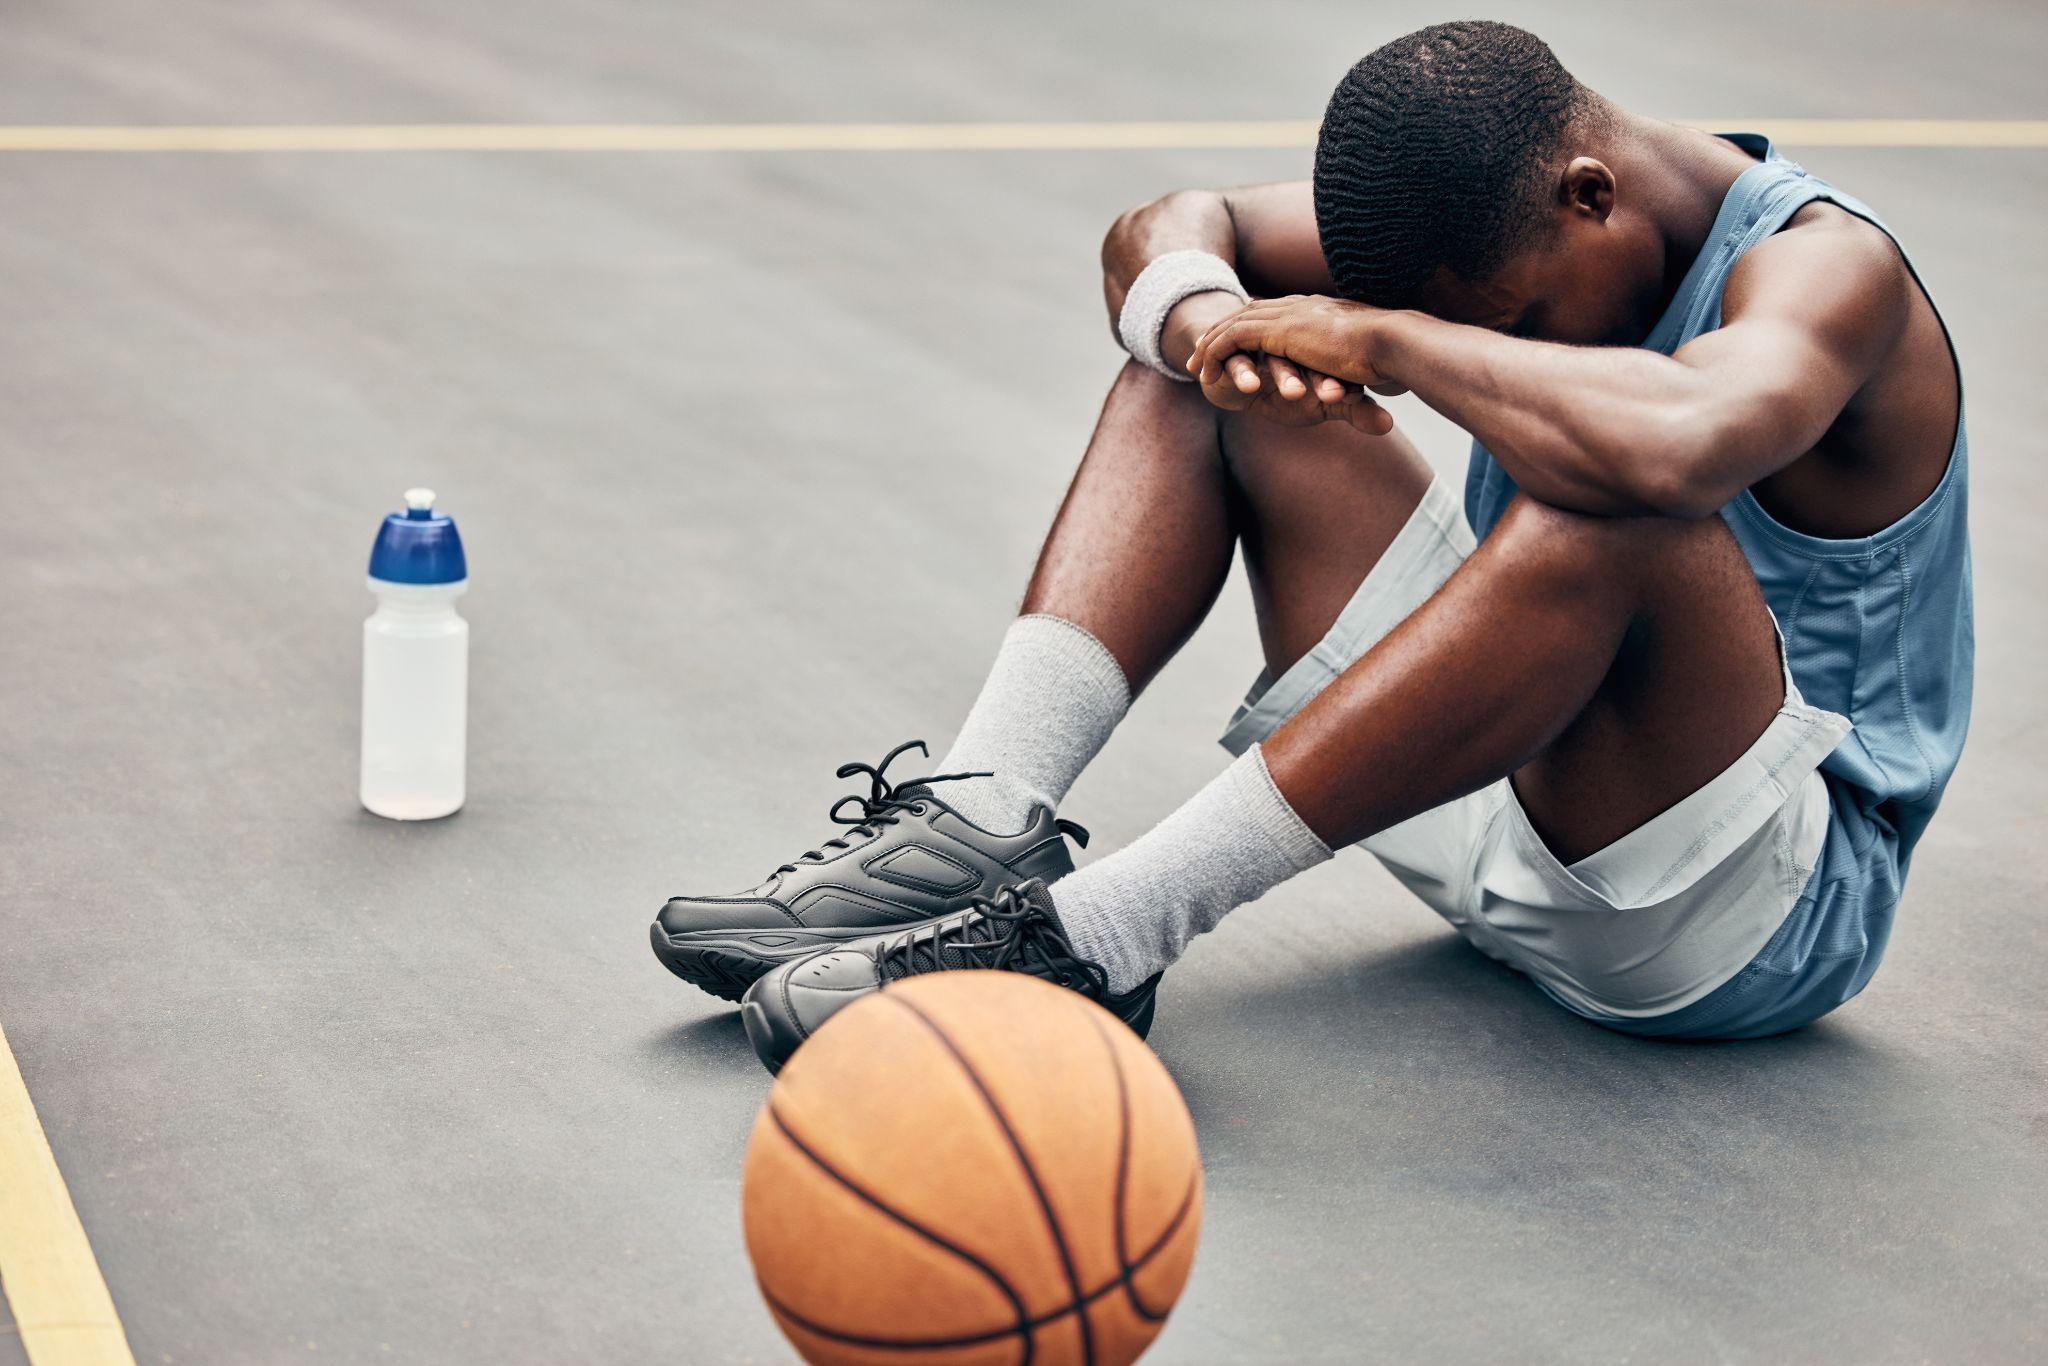 Tired, depression or sad basketball player with training gear after game